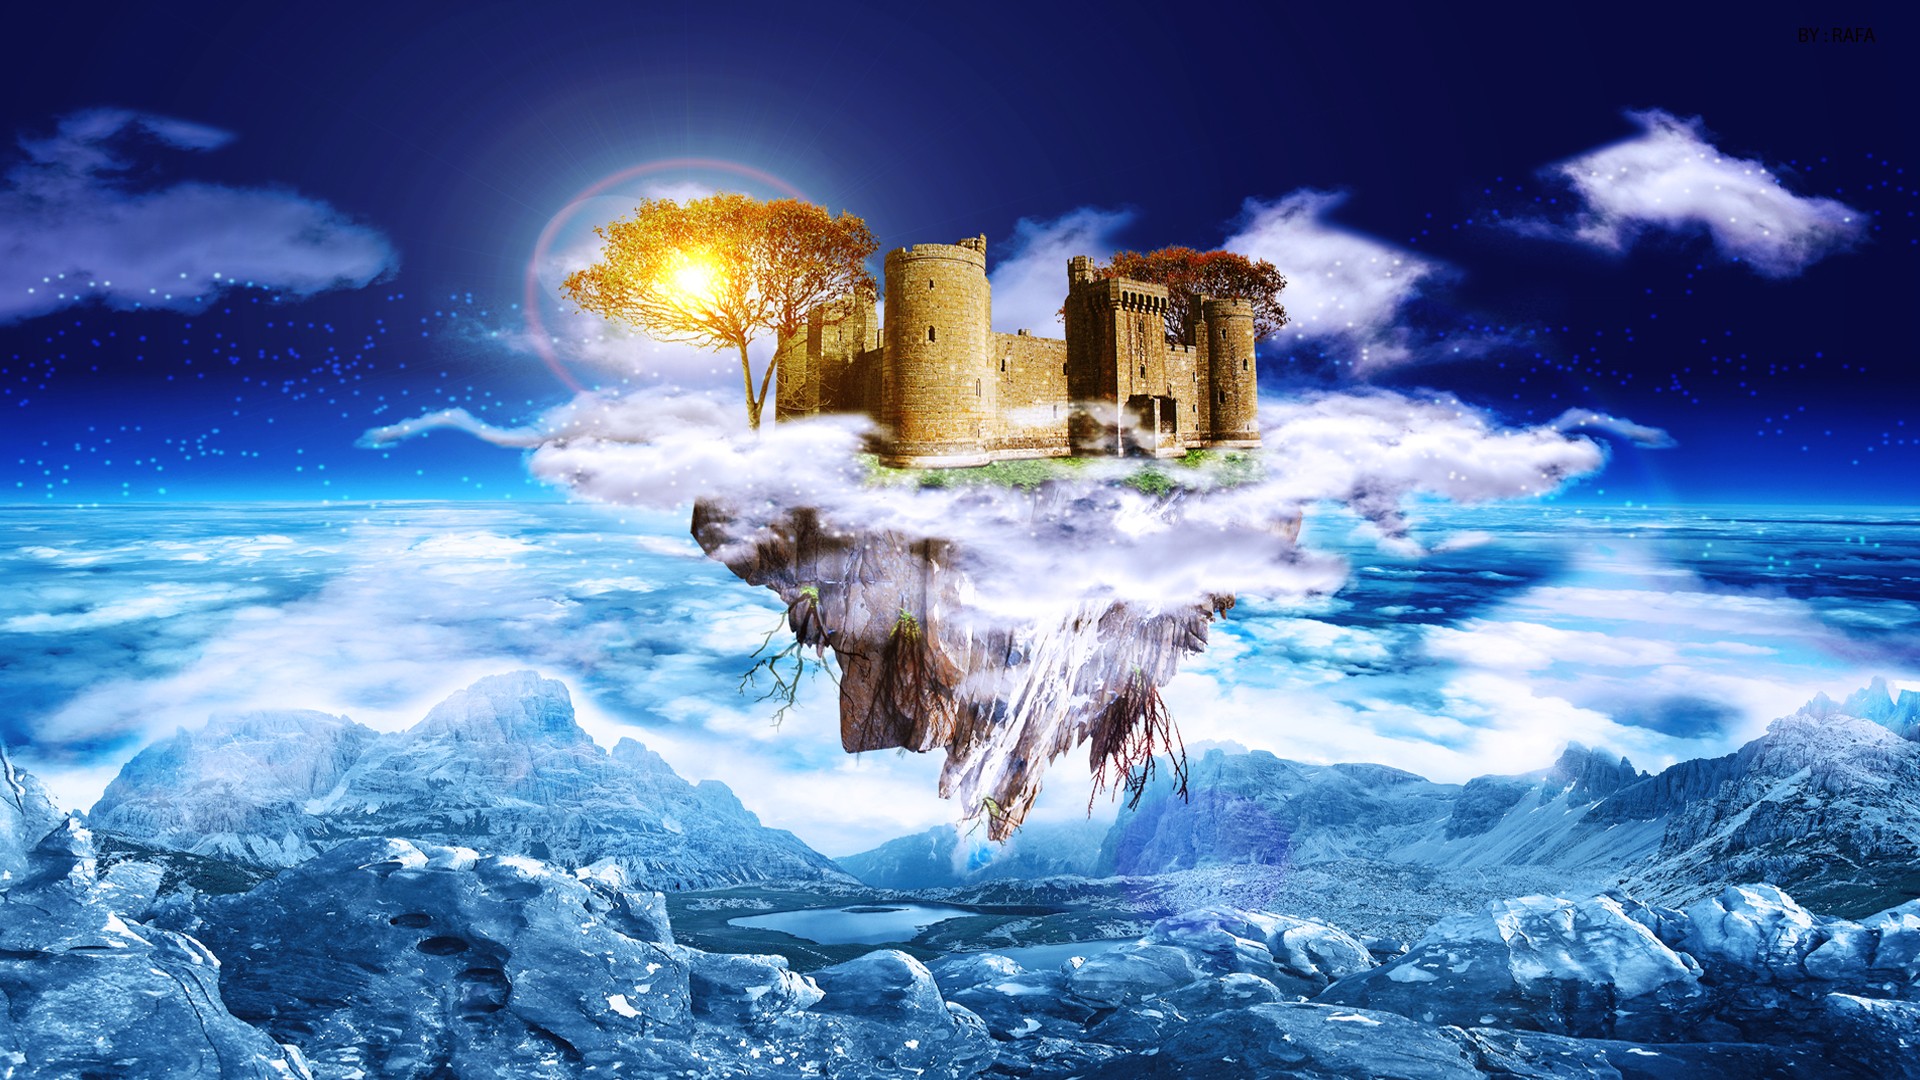 General 1920x1080 digital art fantasy art architecture castle floating island mountains rocks trees lake clouds sunlight roots